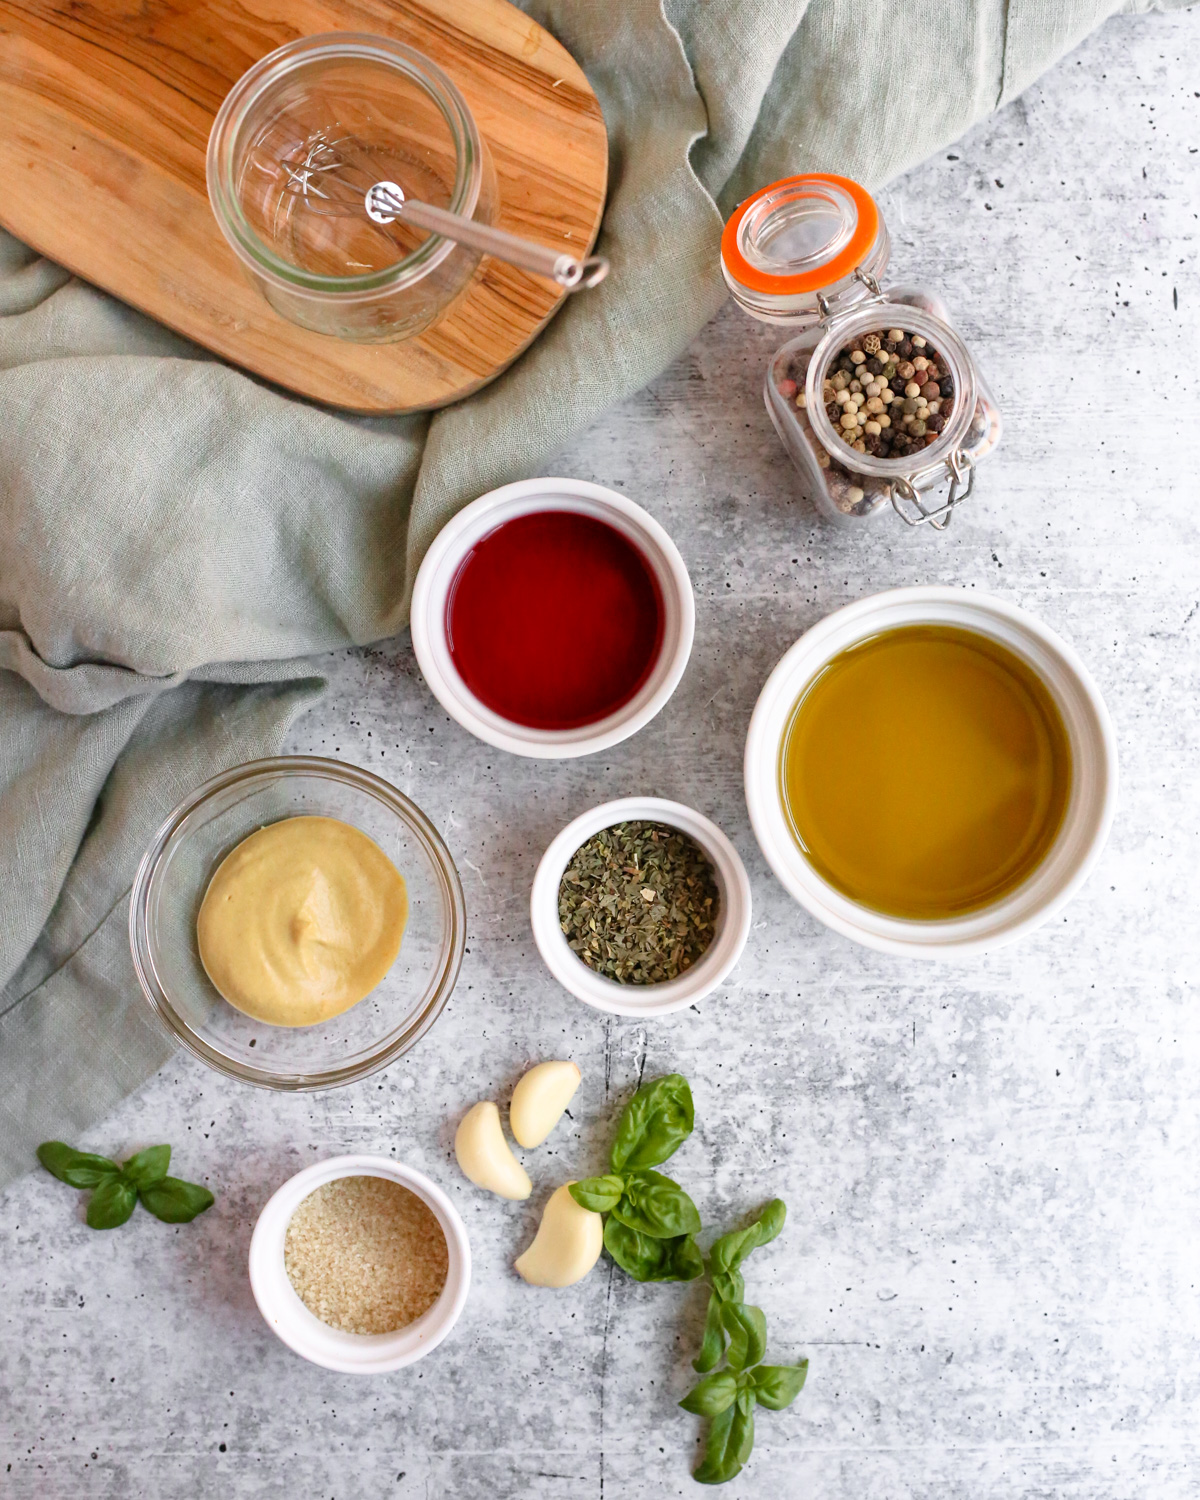 Flatlay style image of all the ingredients needed to make a homemade red wine vinaigrette dressing recipe, displayed on a kitchen countertop in various sizes of small glass dishes or ramekins